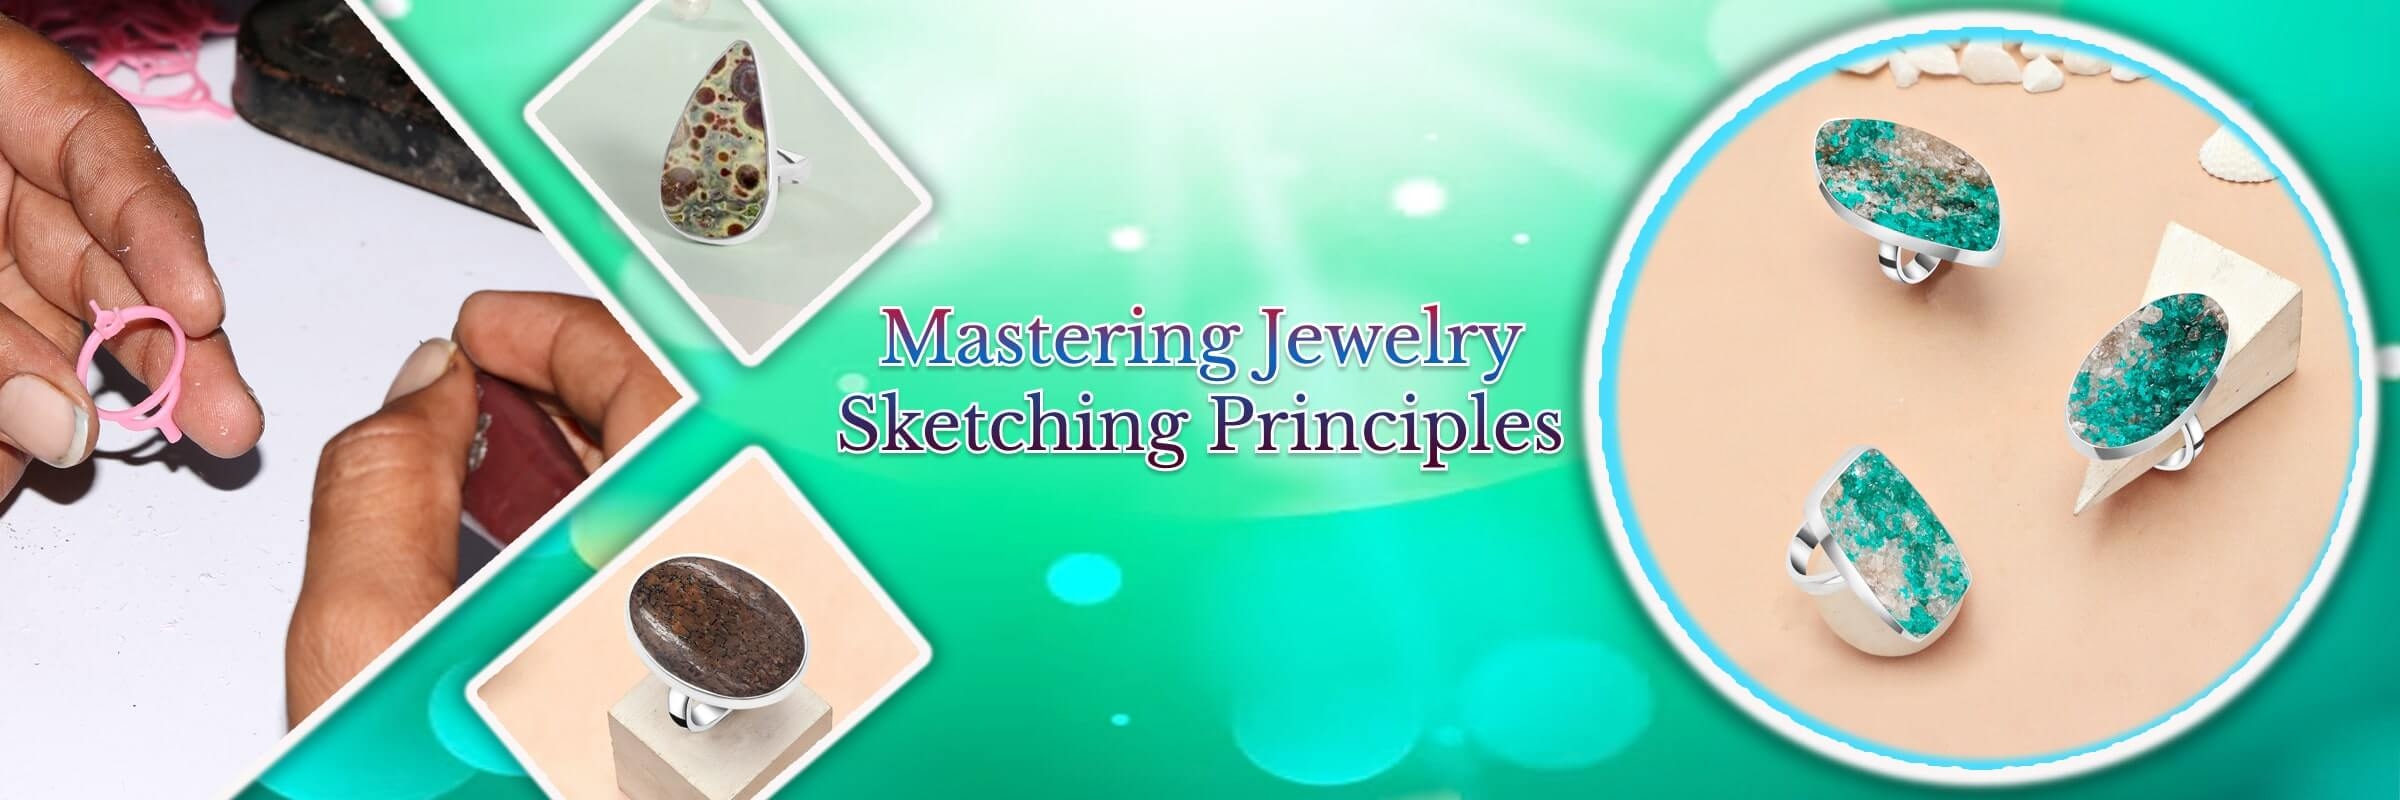 Principles for Sketching Jewelry Design